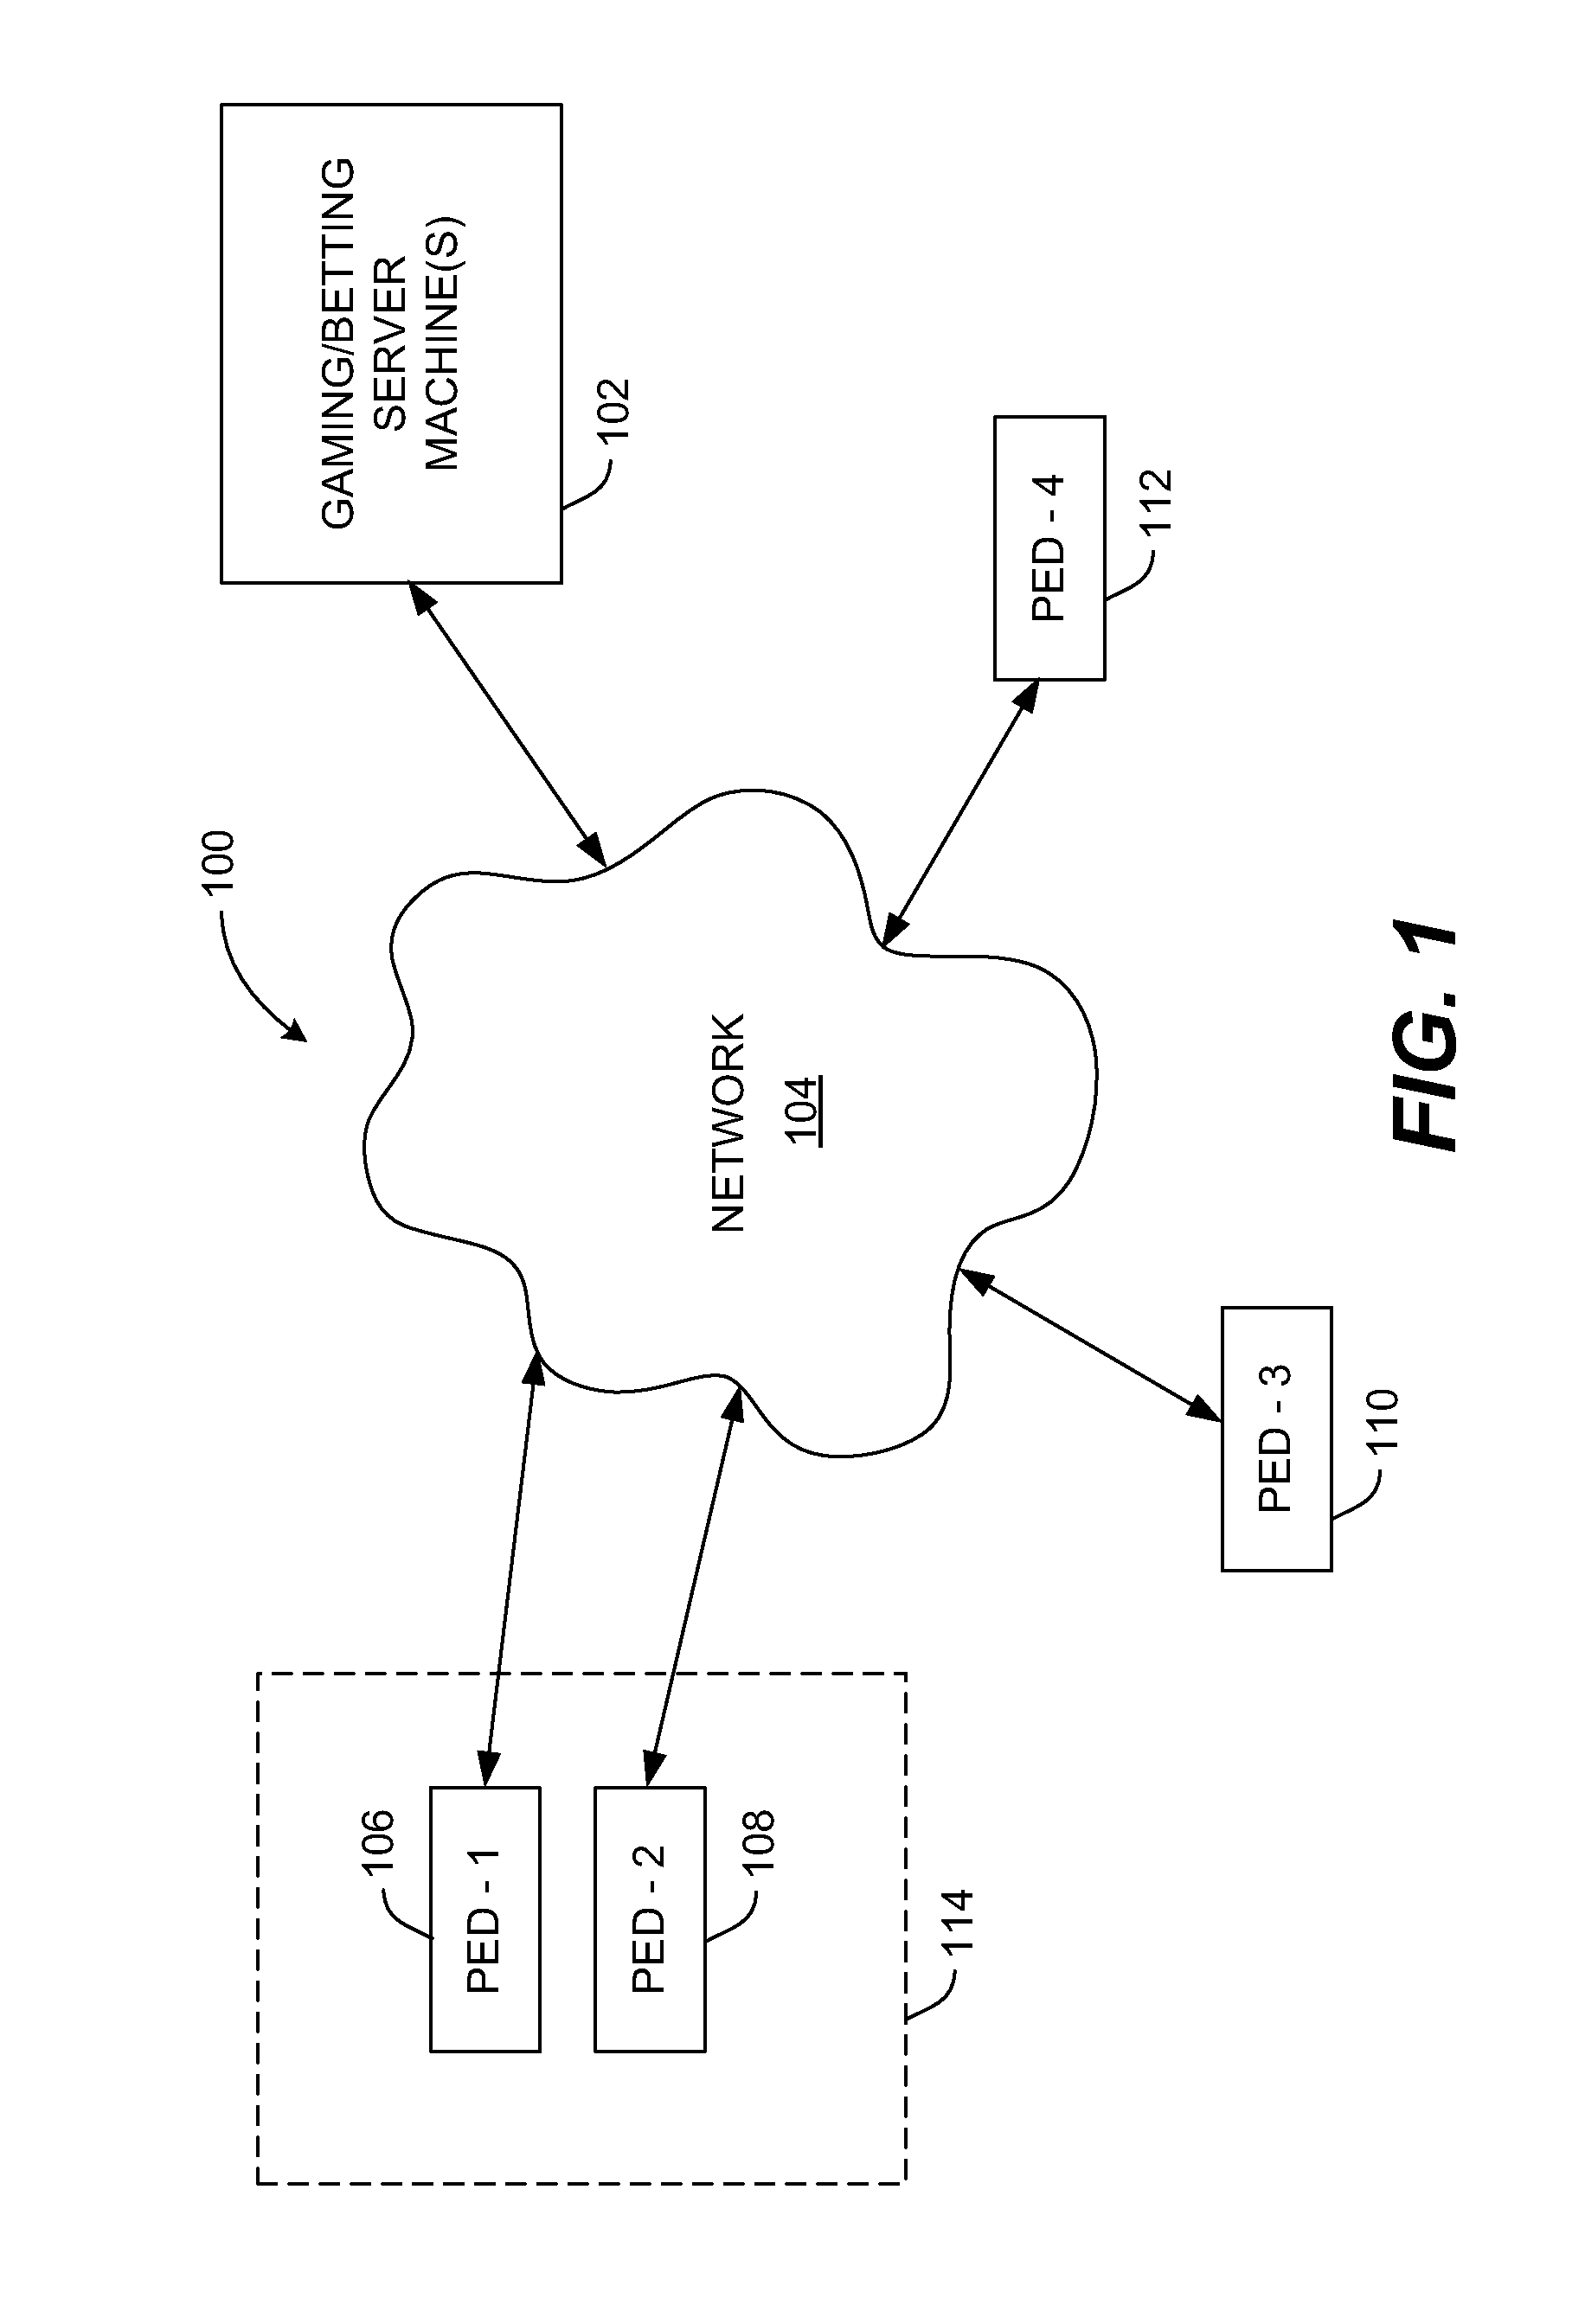 Adaptive mobile device gaming system